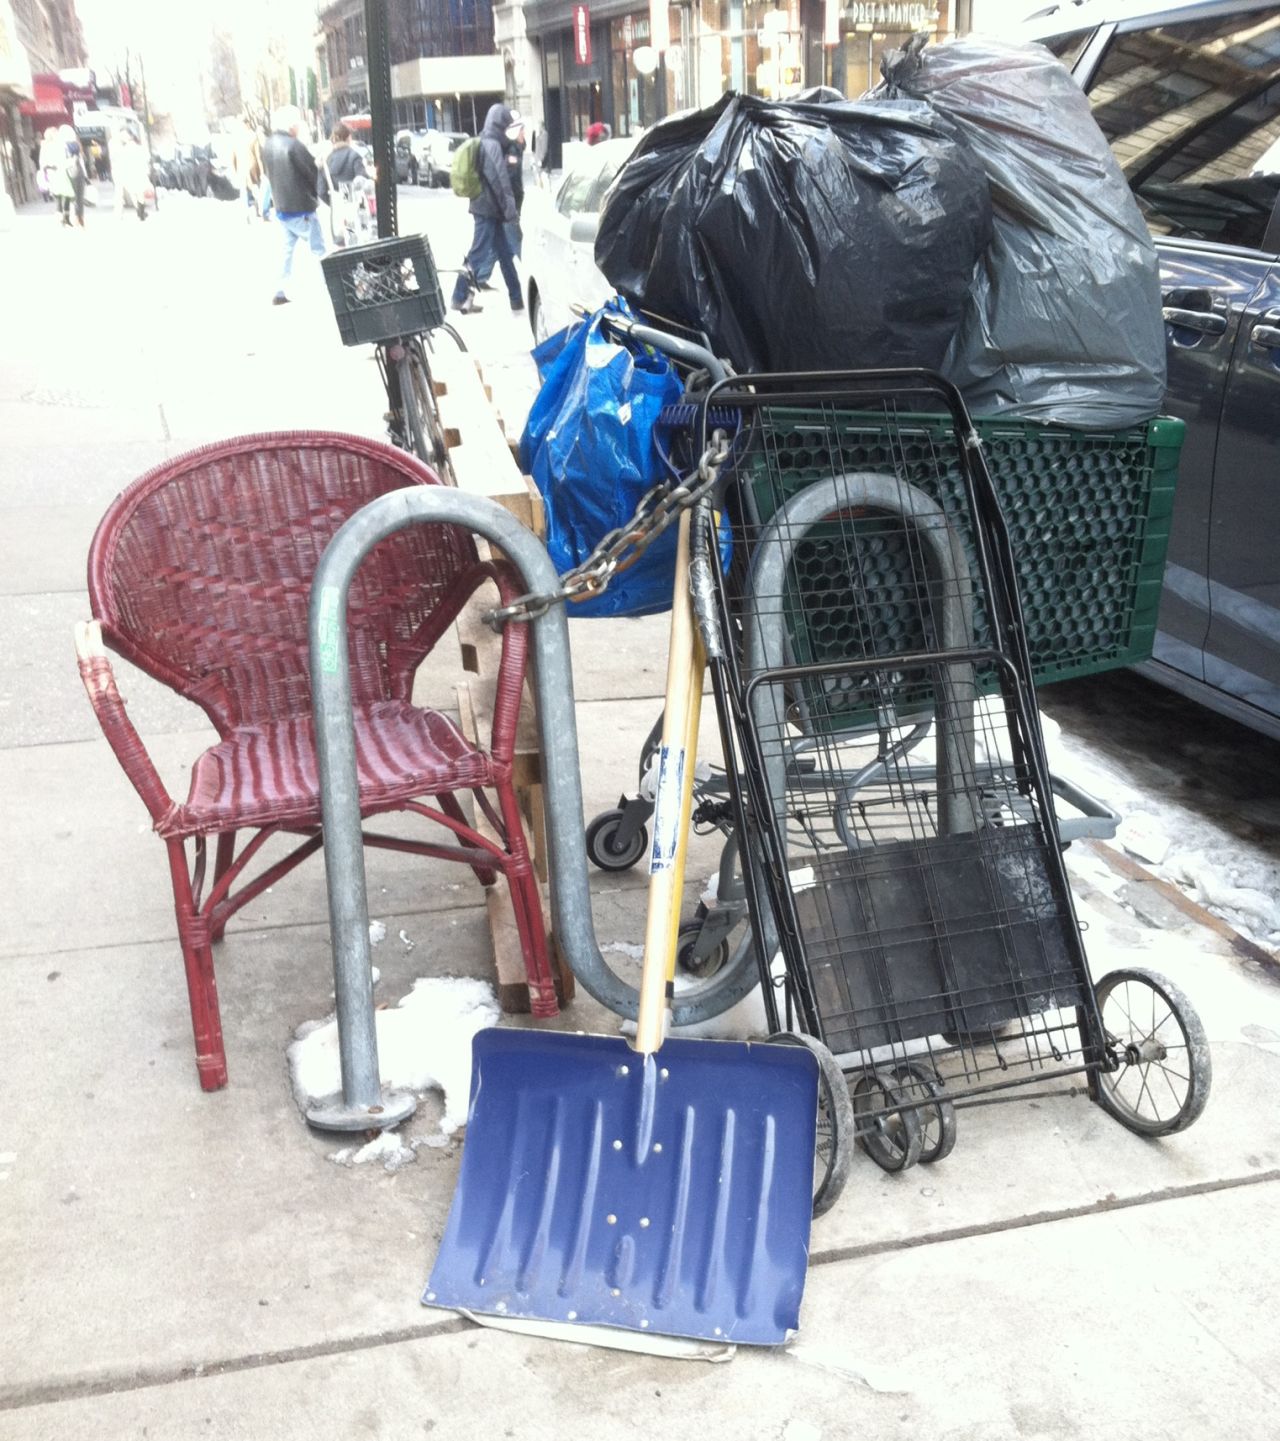 A shopping cart is chained to a bike rack with all its paraphernalia in New York City. "I assumed it belonged to a homeless person who locks it up whenever he or she takes shelter from the cold," <a href="http://ireport.cnn.com/docs/DOC-1082009">Marjorie Zien</a> said. "Based on the appearance, it is definitely 'owned' by someone."